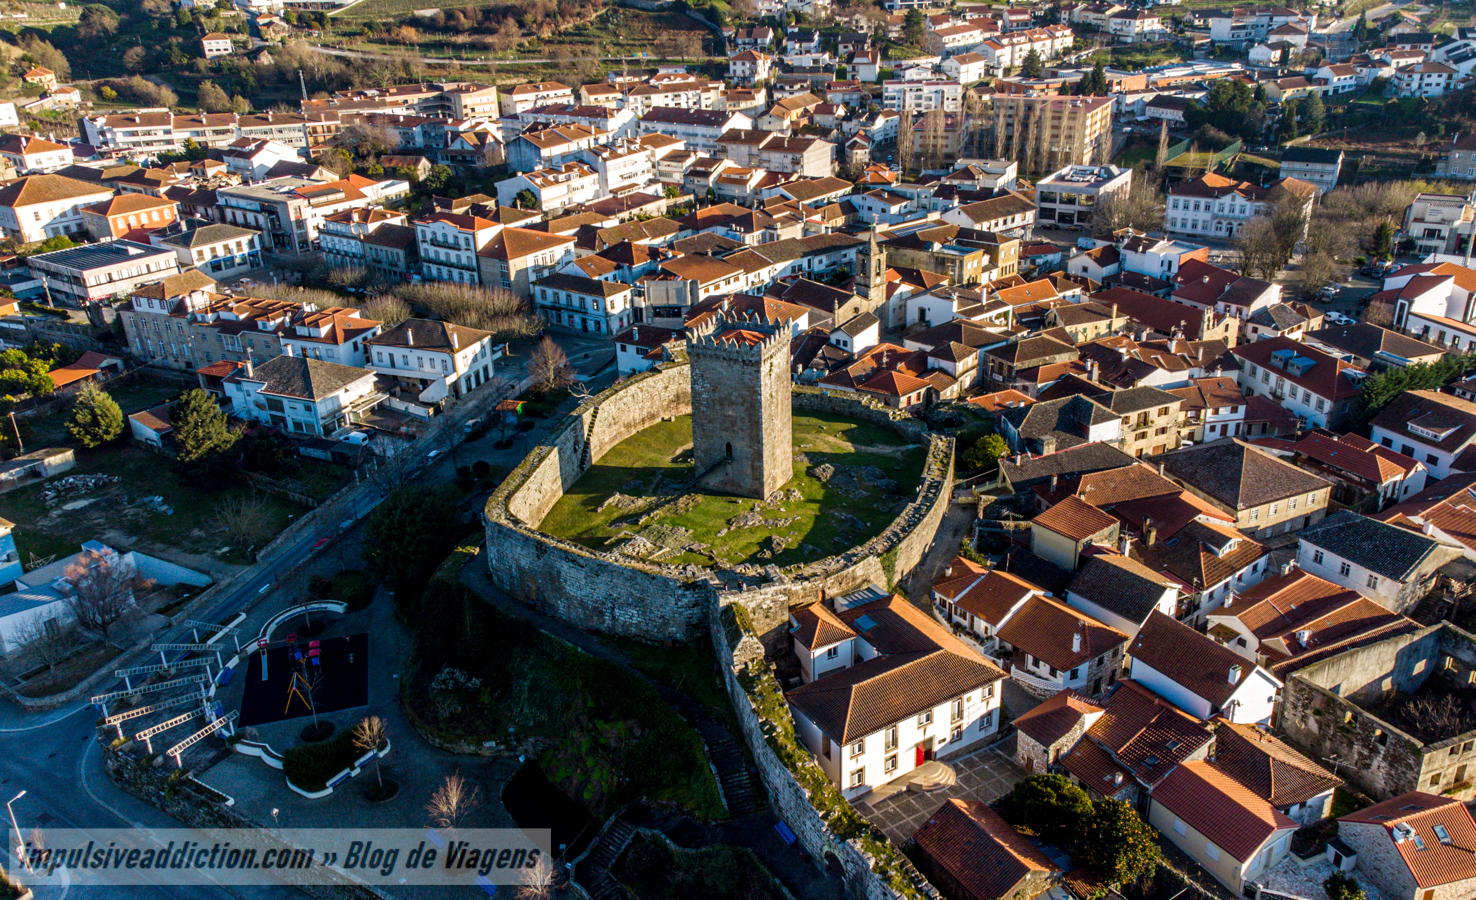 Castle and Town of Melgaço